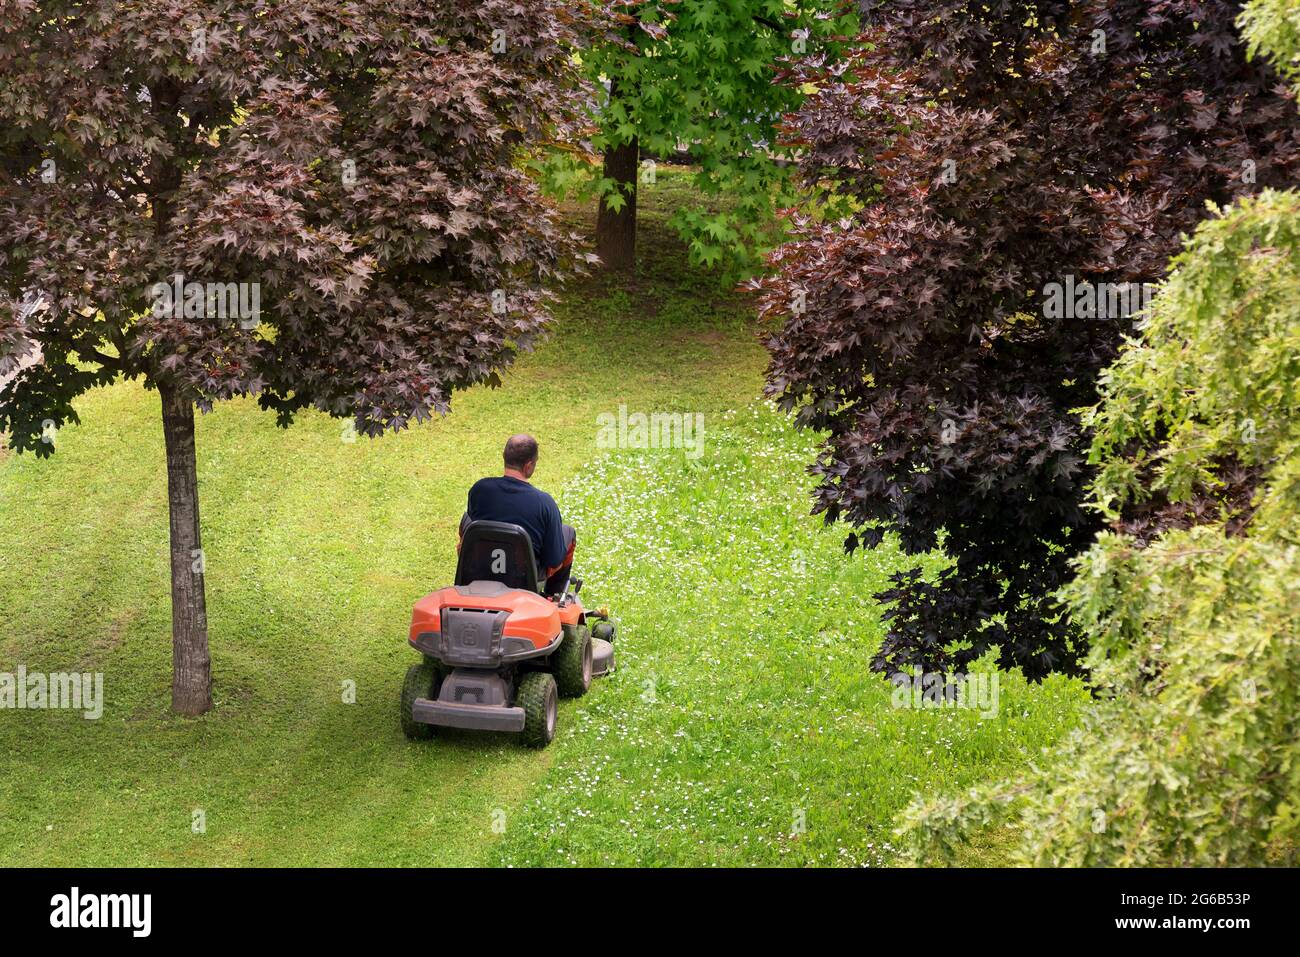 High angle view of a man using a ride-on mower to cut the grass in his back yard viewed between leafy green trees in spring or summer Stock Photo